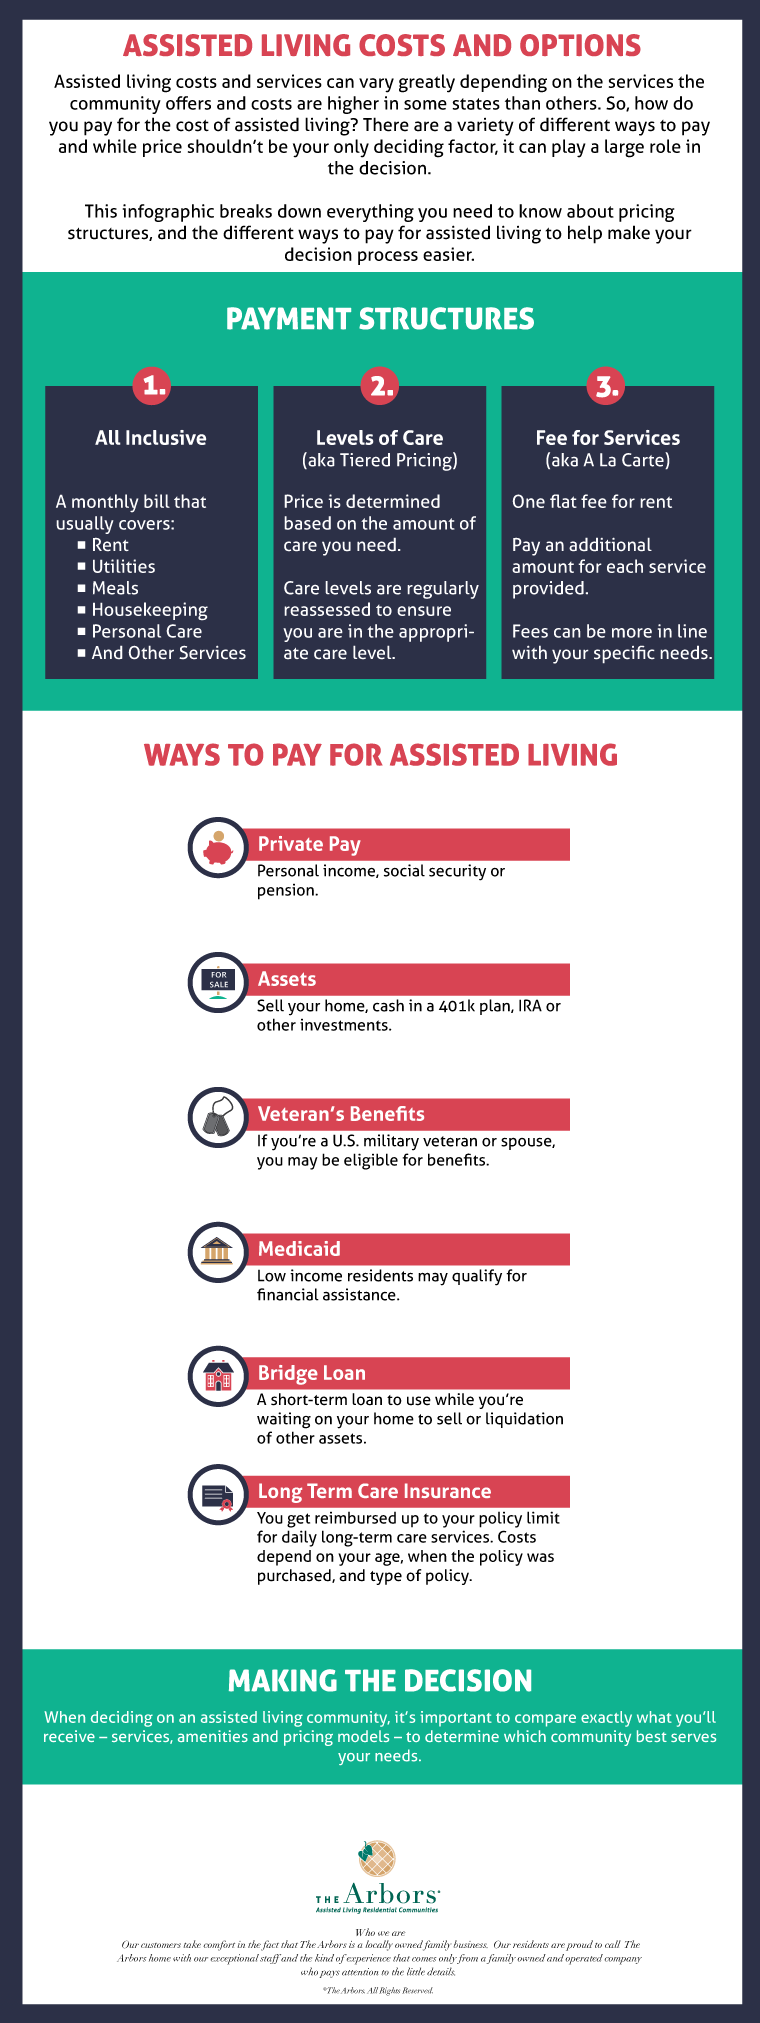 Infographic: Ways to Pay for Assisted Living